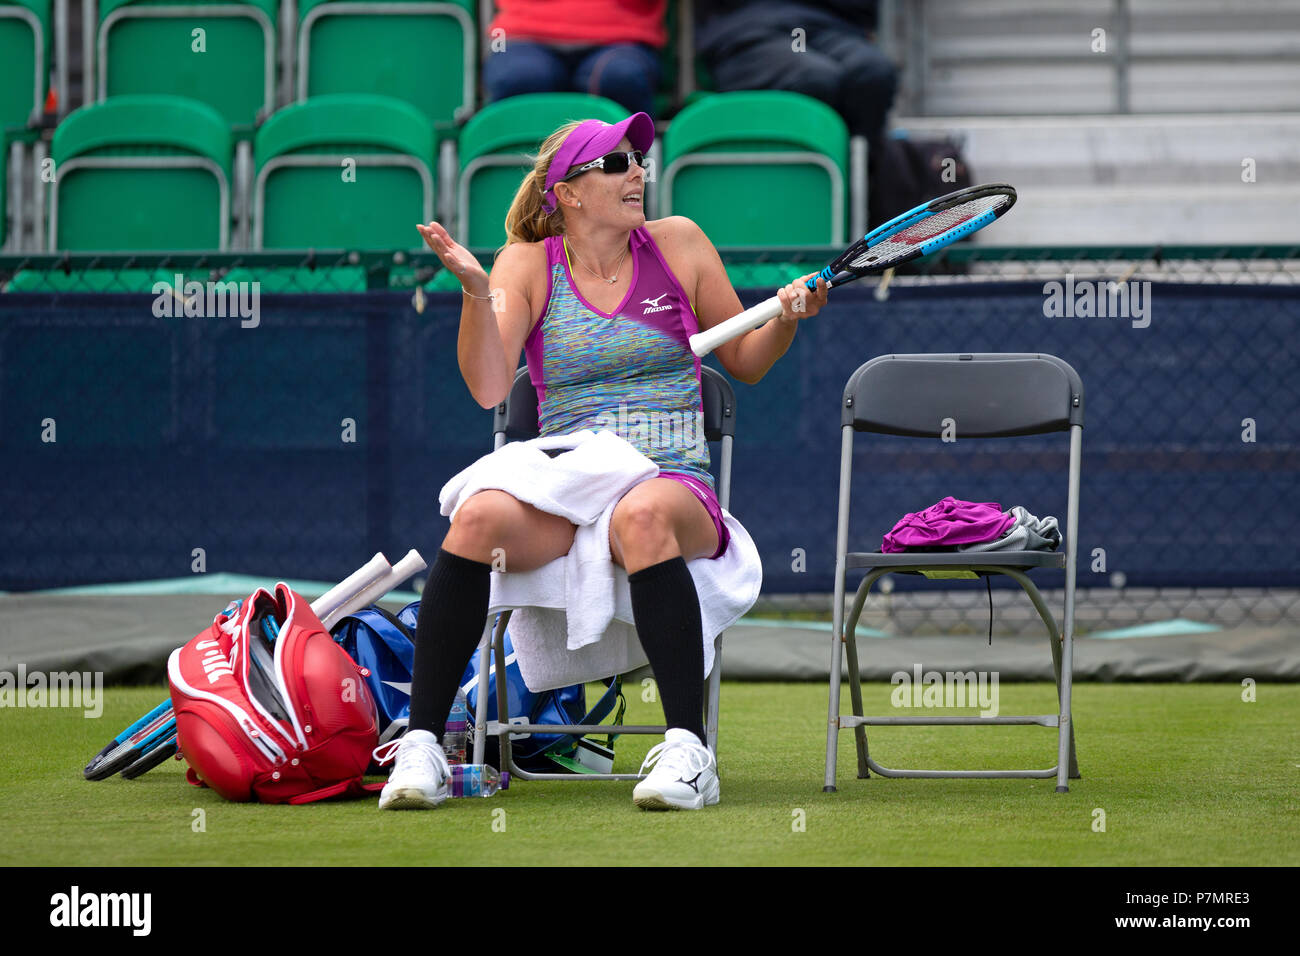 Professional tennis player Anastasia Rodionova arguing with the umpire from her chair during a match. Stock Photo